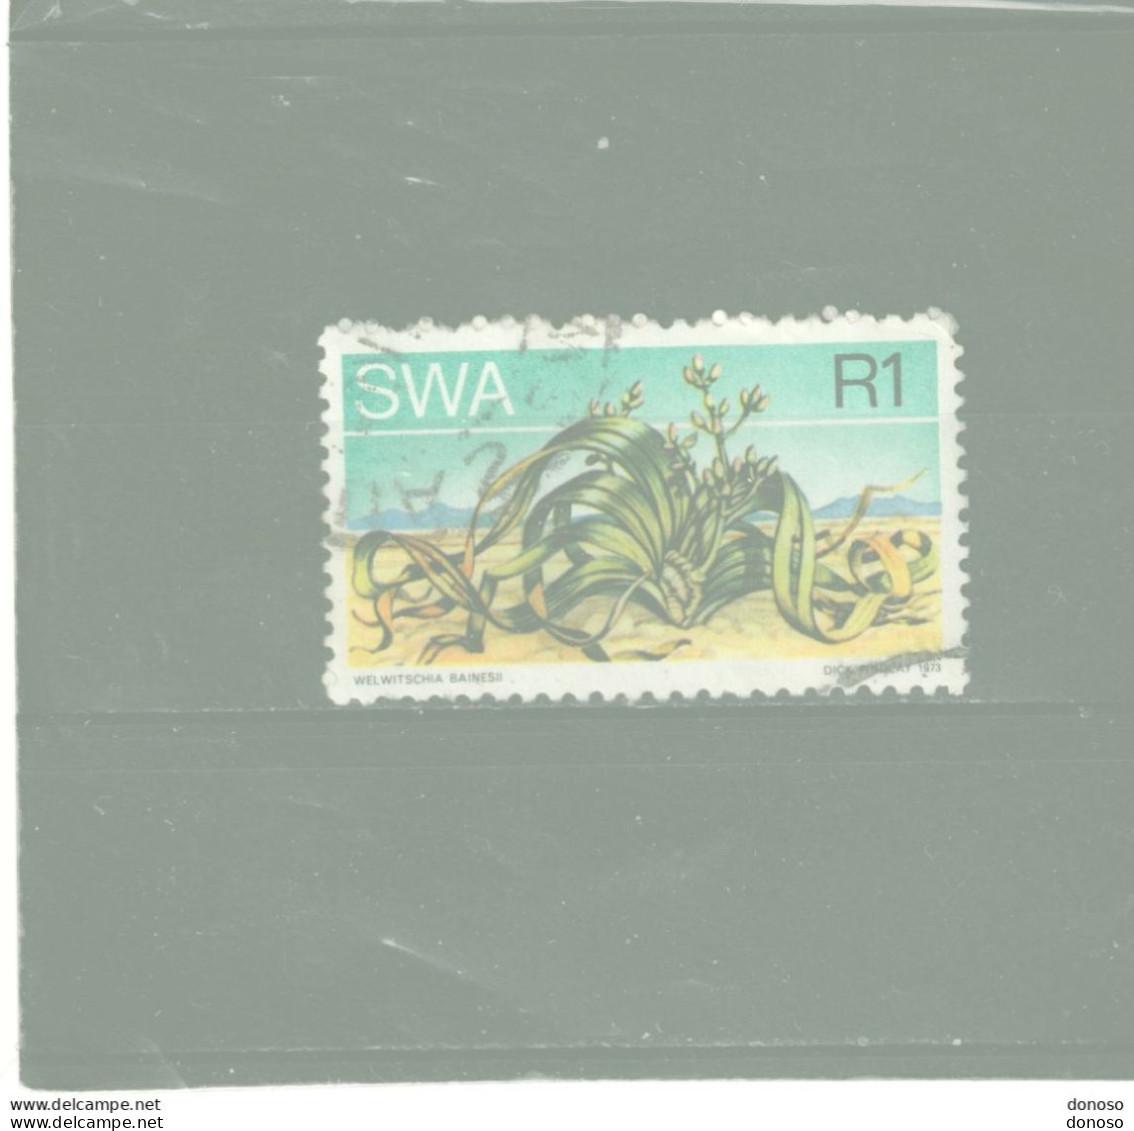 SWA SUD OUEST AFRICAIN 1973 Welwischia Yvert 331 Oblitéré Cote Yv 6,50 Euros - Africa Del Sud-Ovest (1923-1990)